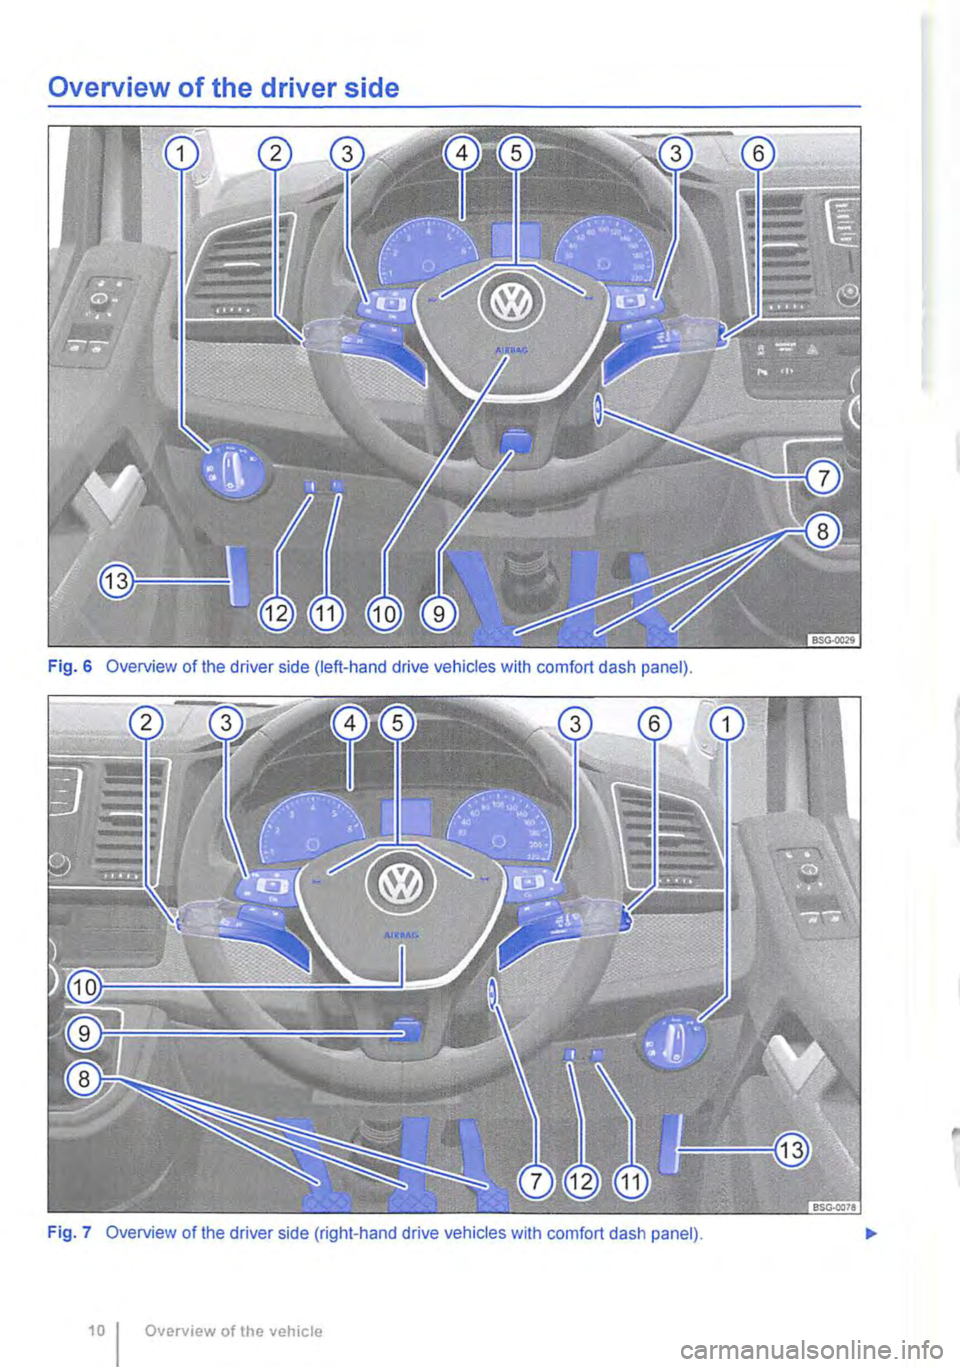 VOLKSWAGEN TRANSPORTER 2021  Owners Manual Overview of the driver side 
Fig. 6 Overview of the driver side (left-hand drive vehicles with comfort dash panel). 
Fig. 7 Overview of the driver side (right-hand drive vehicles with comfort dash pan